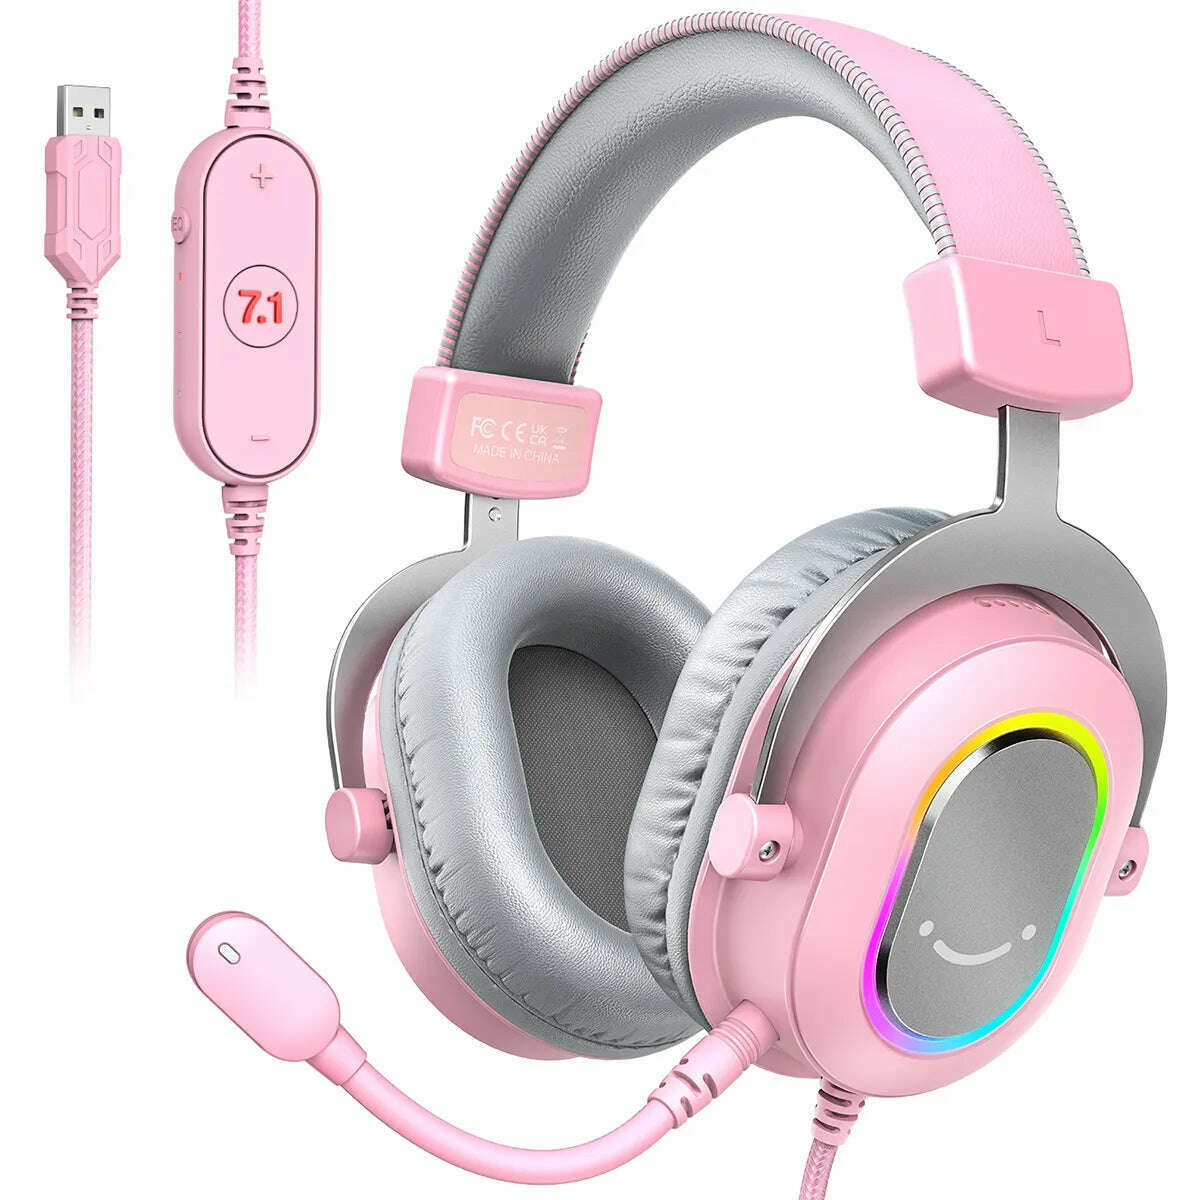 KIMLUD, FIFINE RGB Gaming Headset with 7.1 Surround Sound/3-EQ/MIC,Over-ear Headphone with In-line Control for PC PS4 PS5 Ampligame-H6W, Pink, KIMLUD Womens Clothes